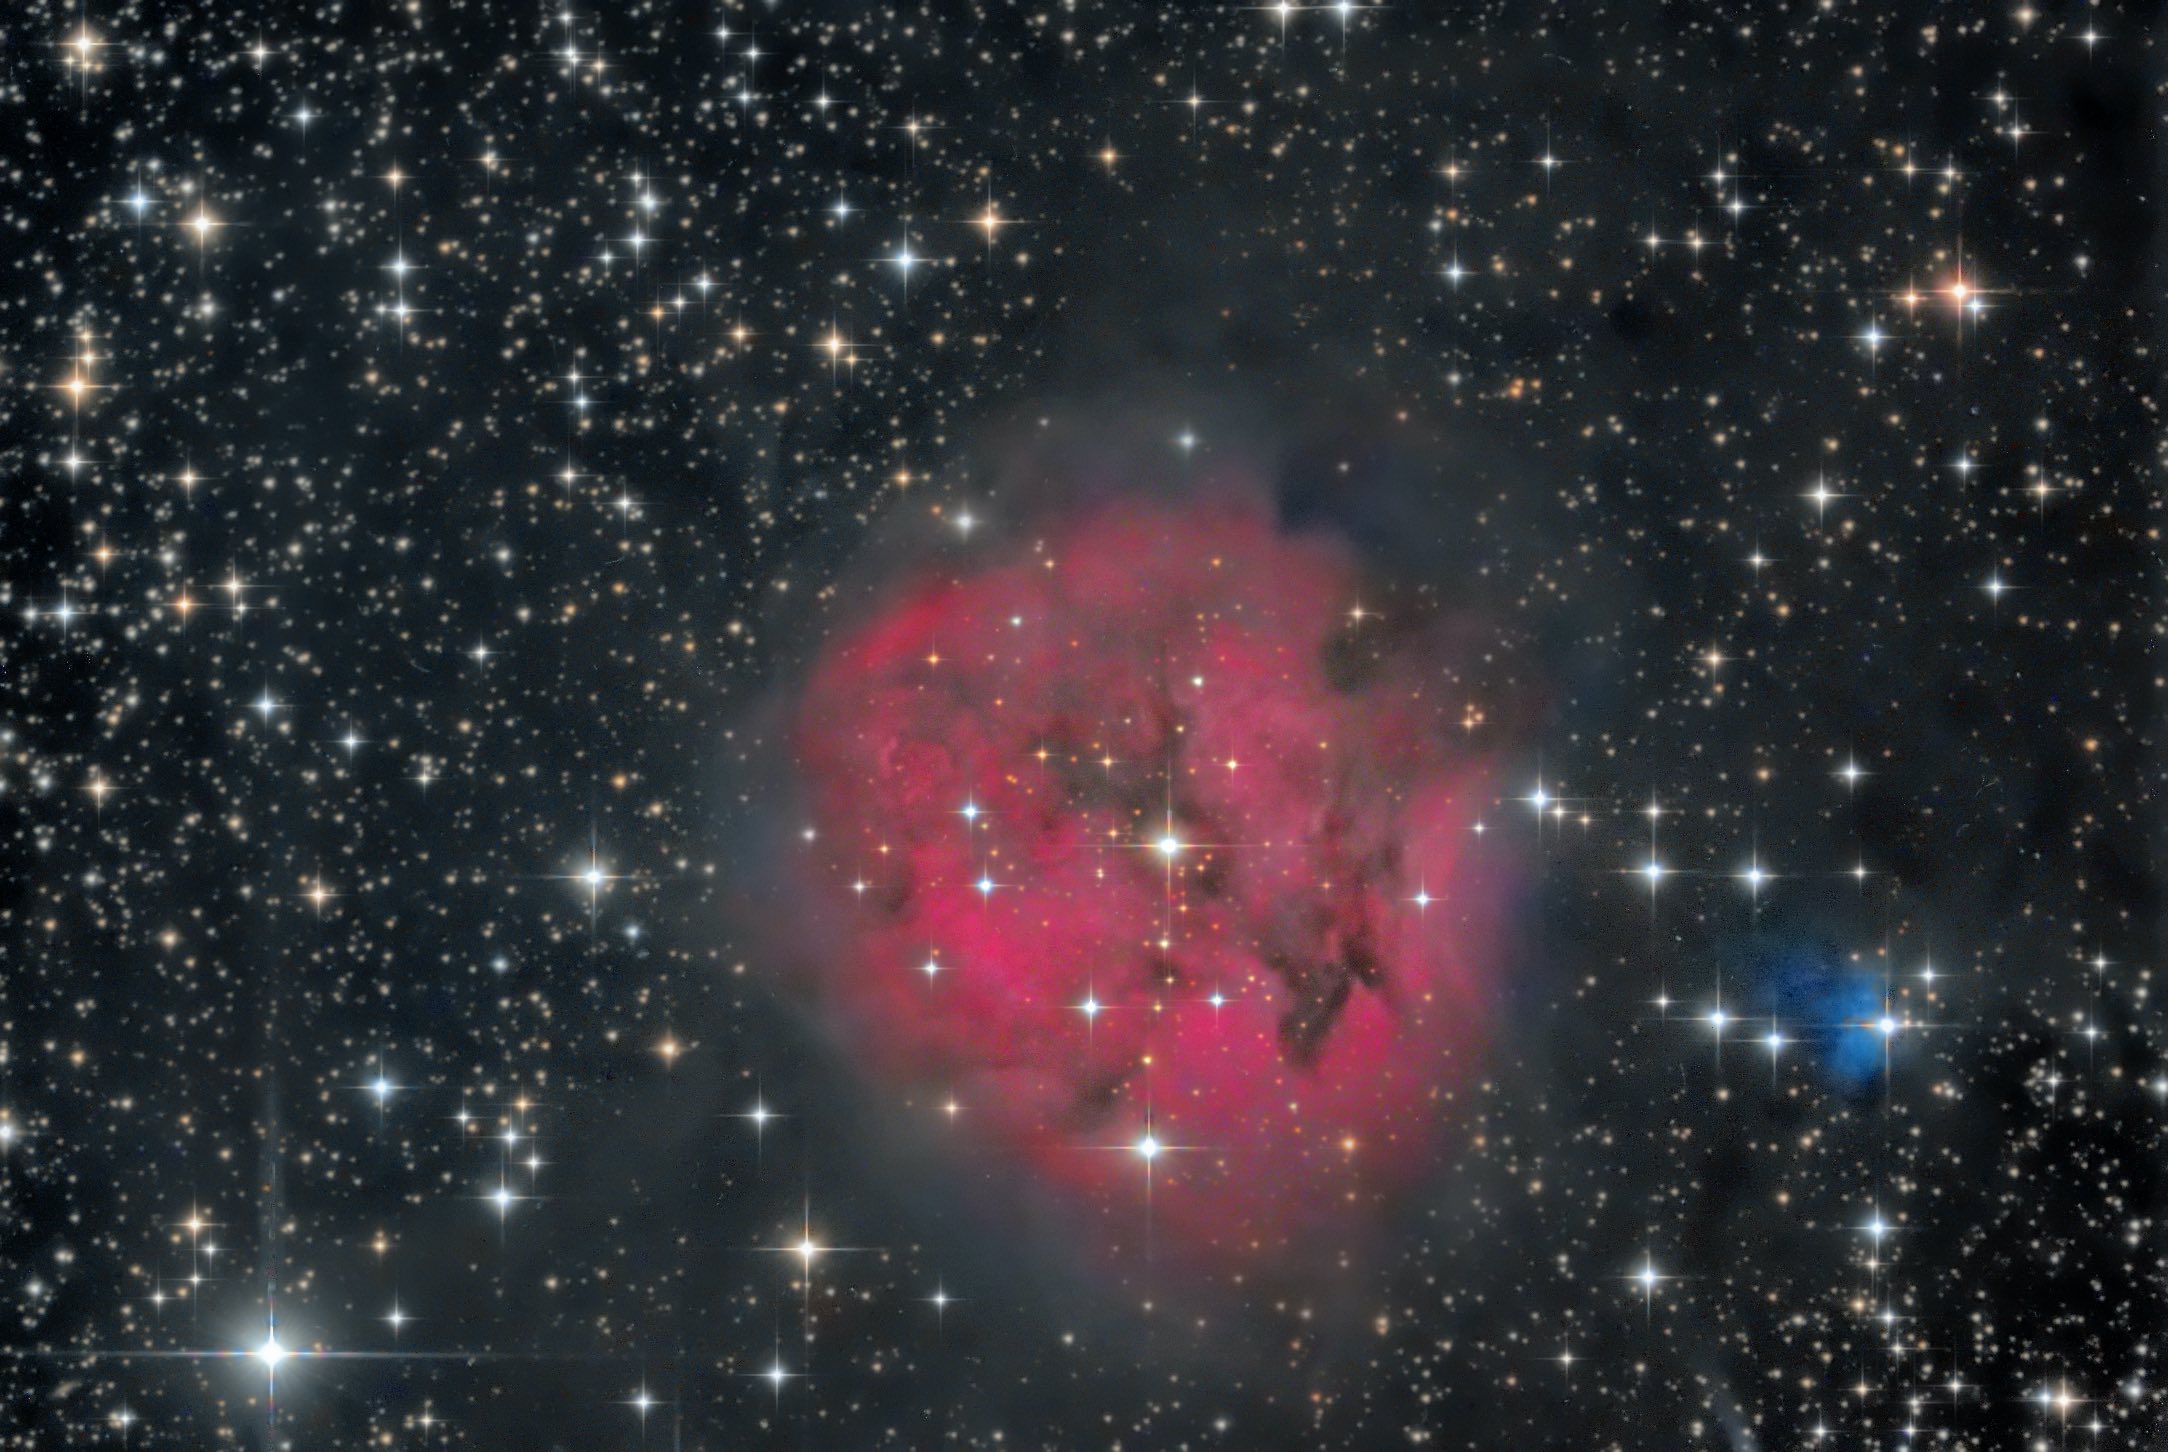 Cocoon nebula IC 5146, picture: Carlos Malagón